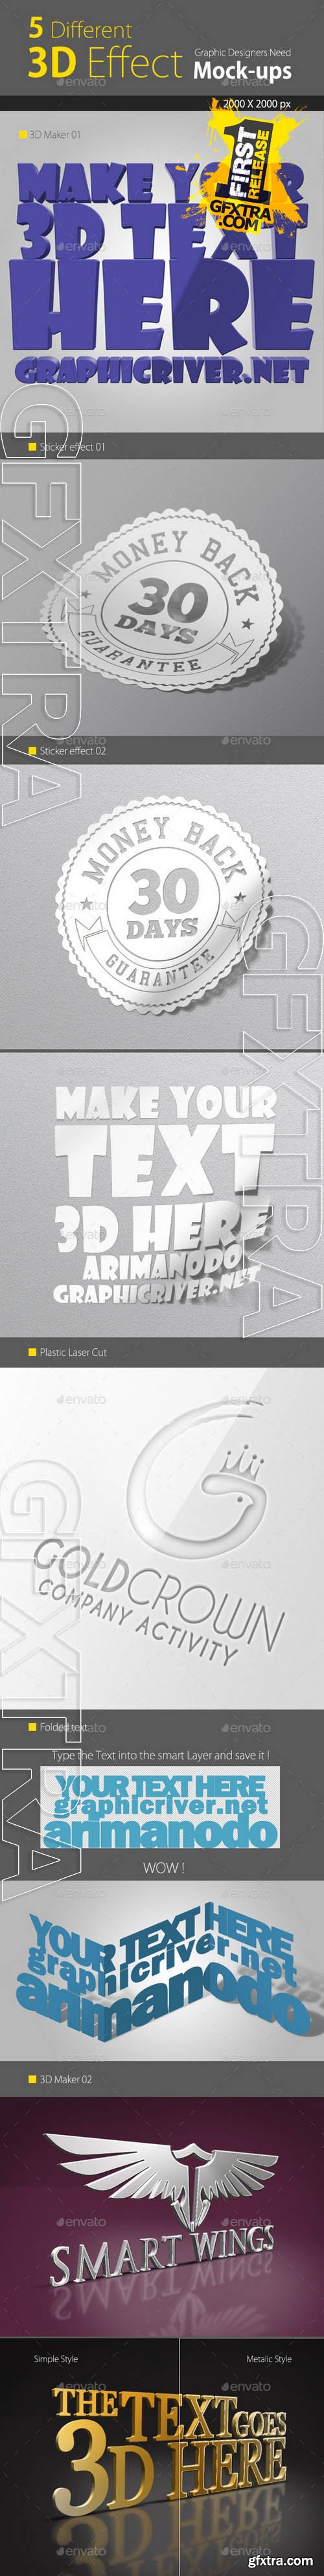 3D Text / Logo Mock up - Graphicriver 9040656